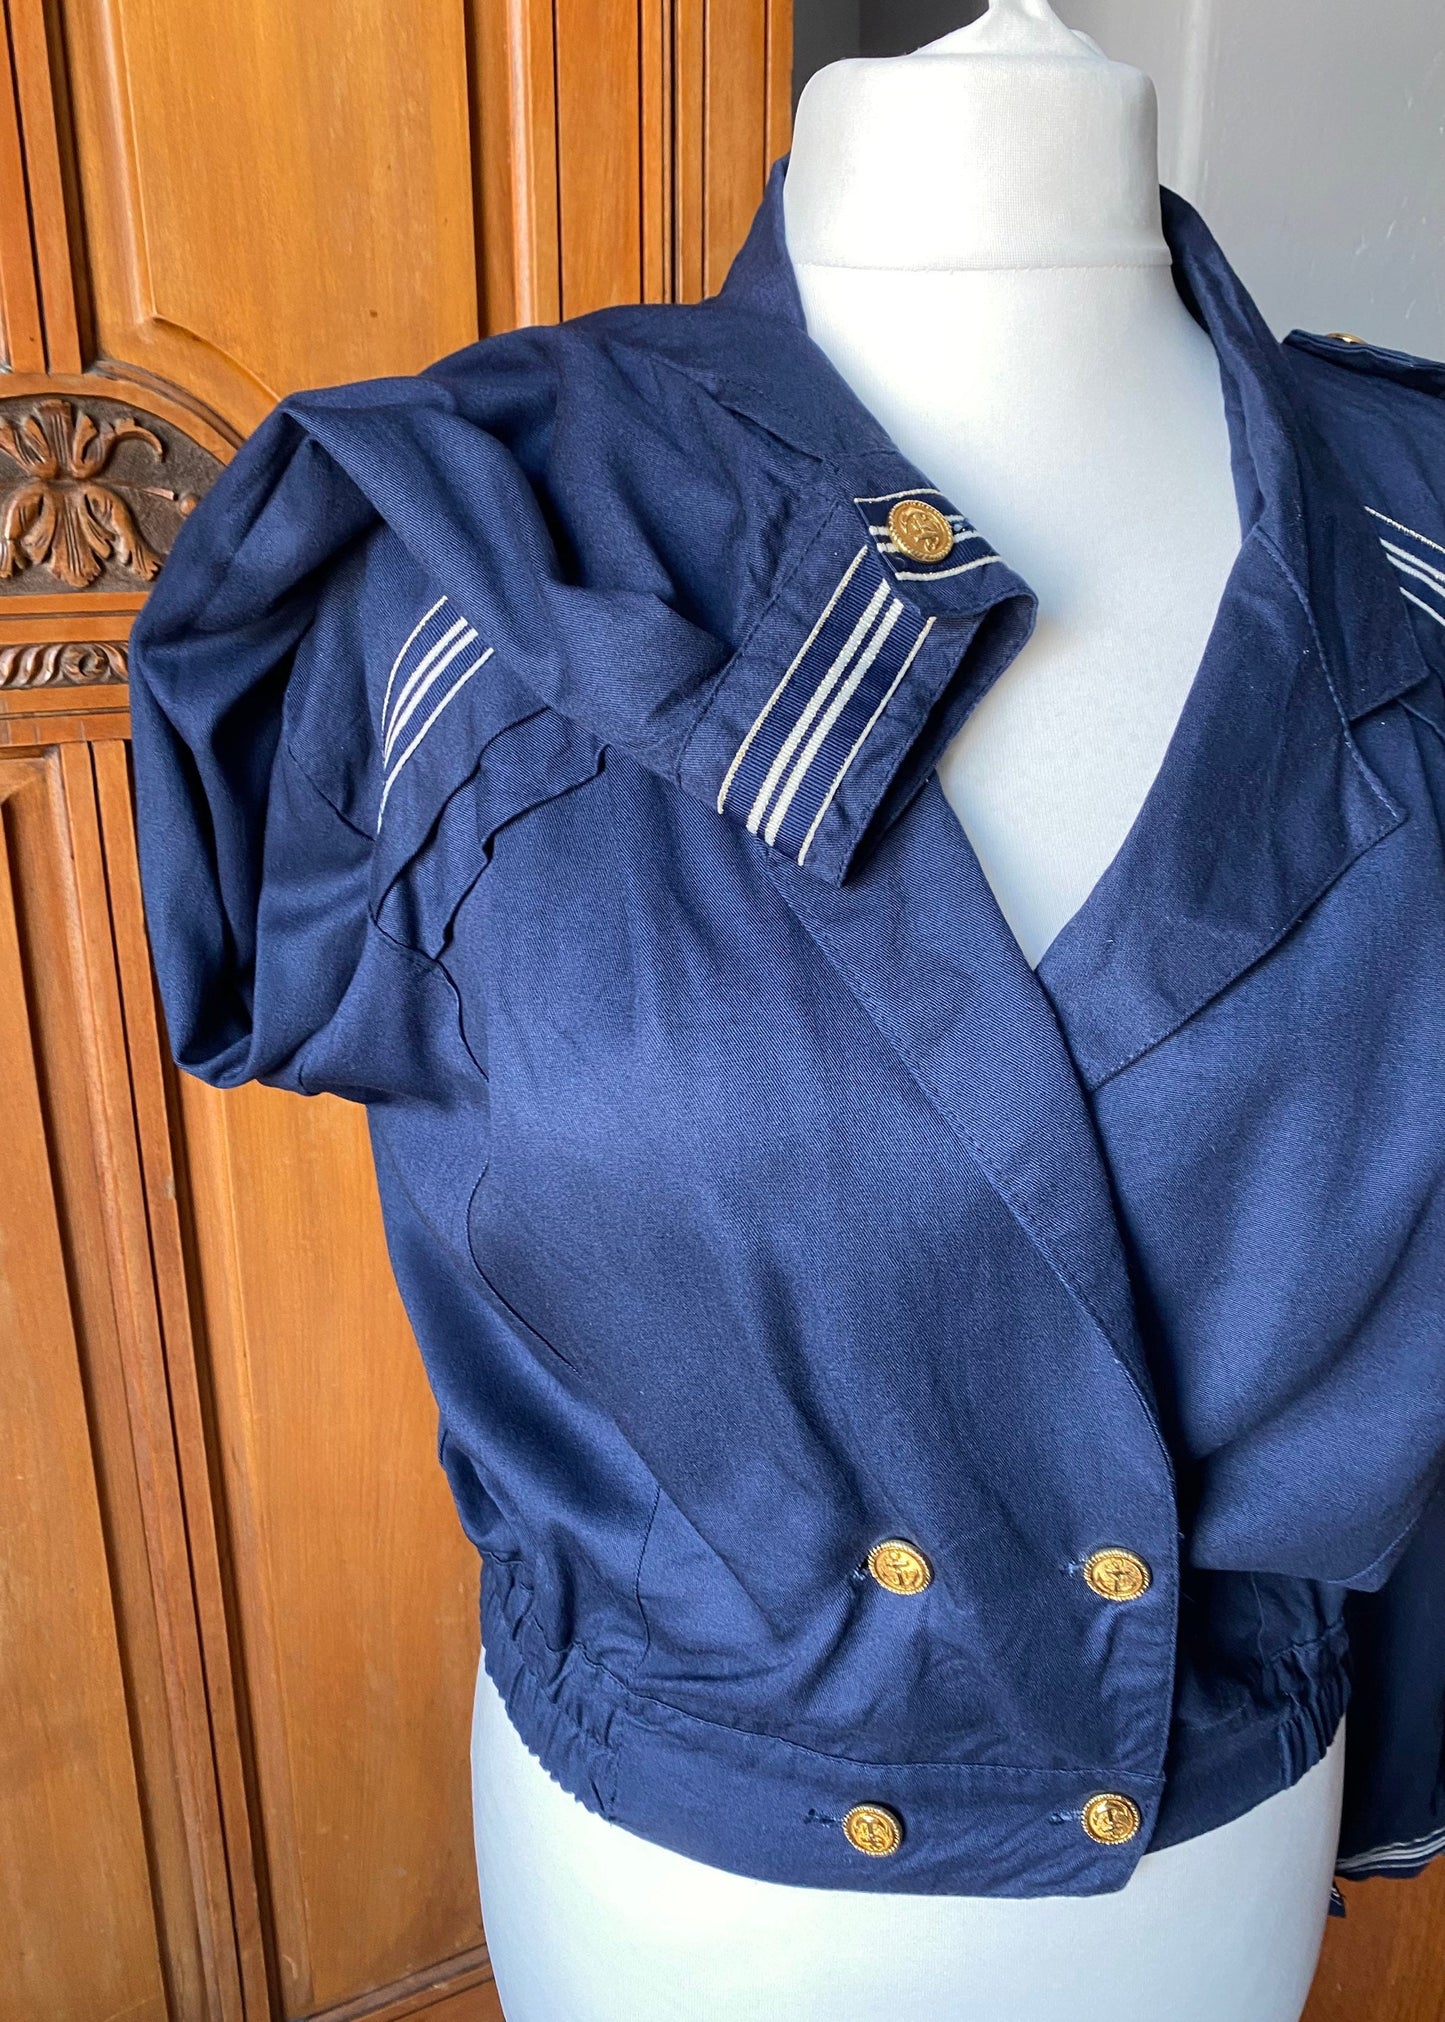 80s blue sailor style jacket with military style detailing. Approx UK size 16-18